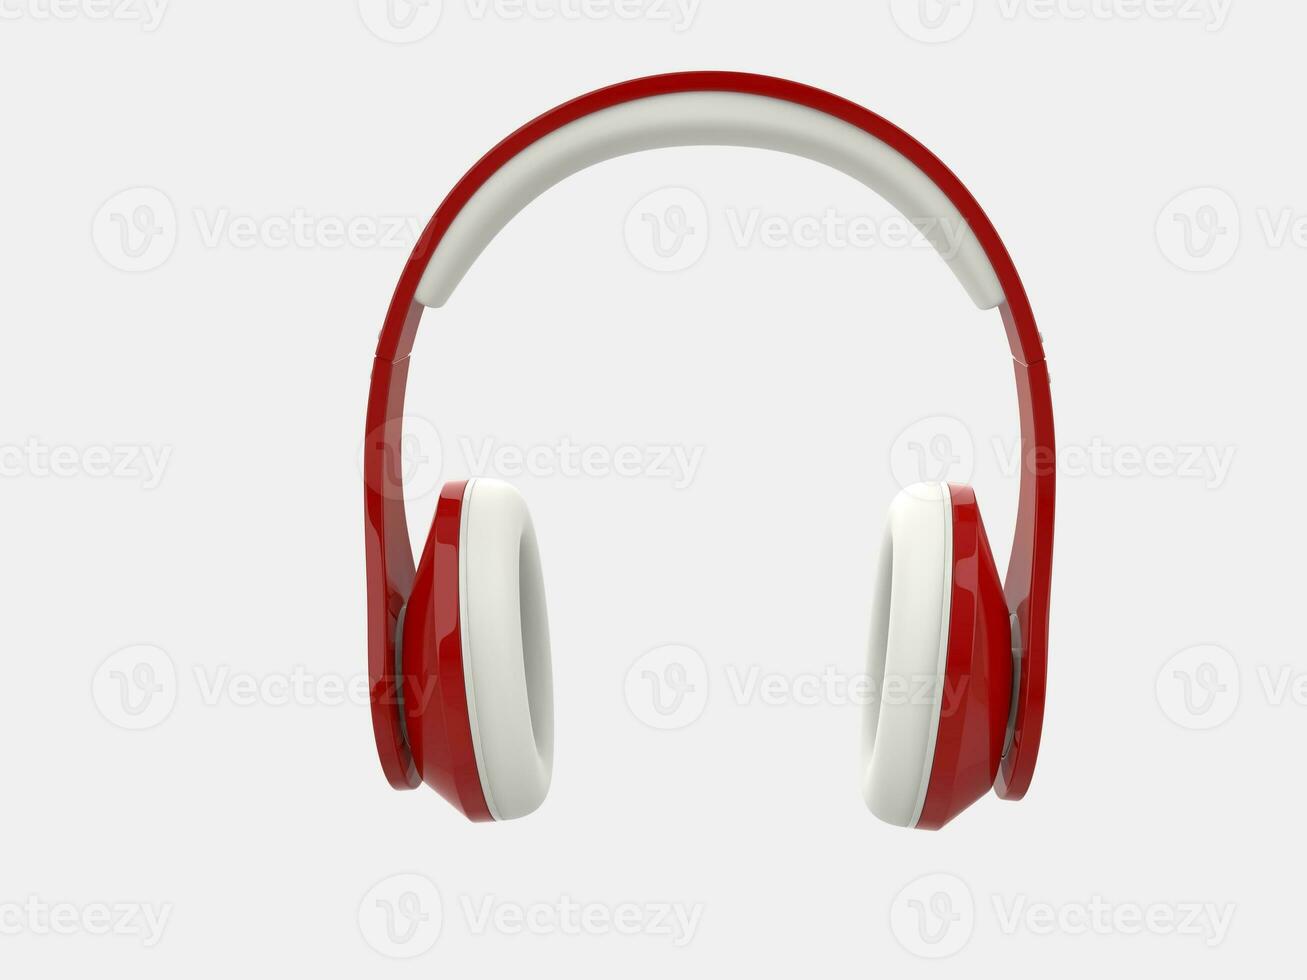 Modern red wireless headphones with white ear pads and details - front view photo